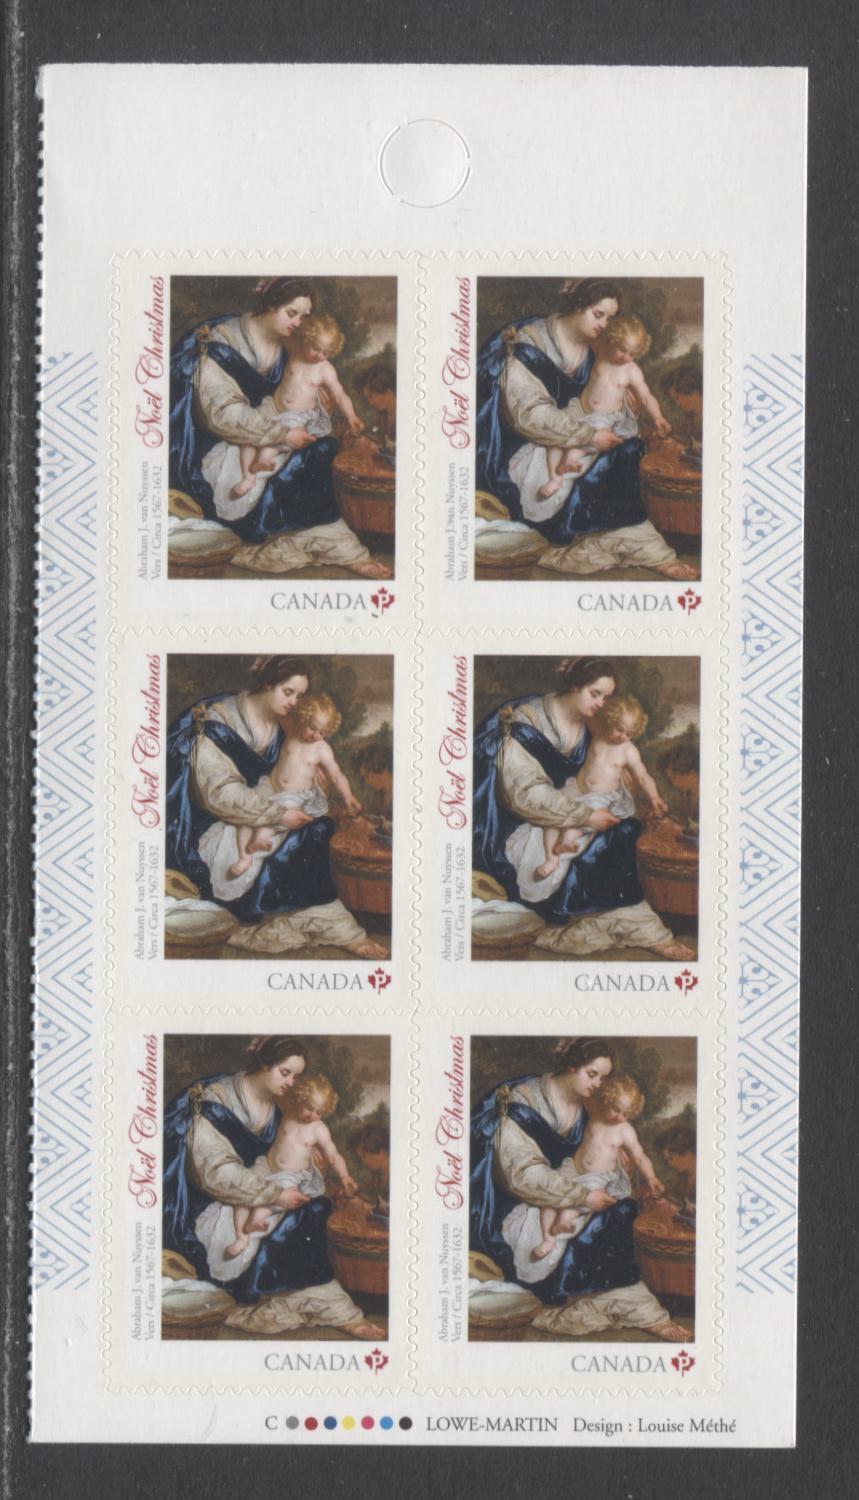 Lot 33 Canada #2797 P(85c) Multicolored Madonna & Child, 2014 Christmas Issue, A VFNH Booklet Pane Of 6 With Inscription